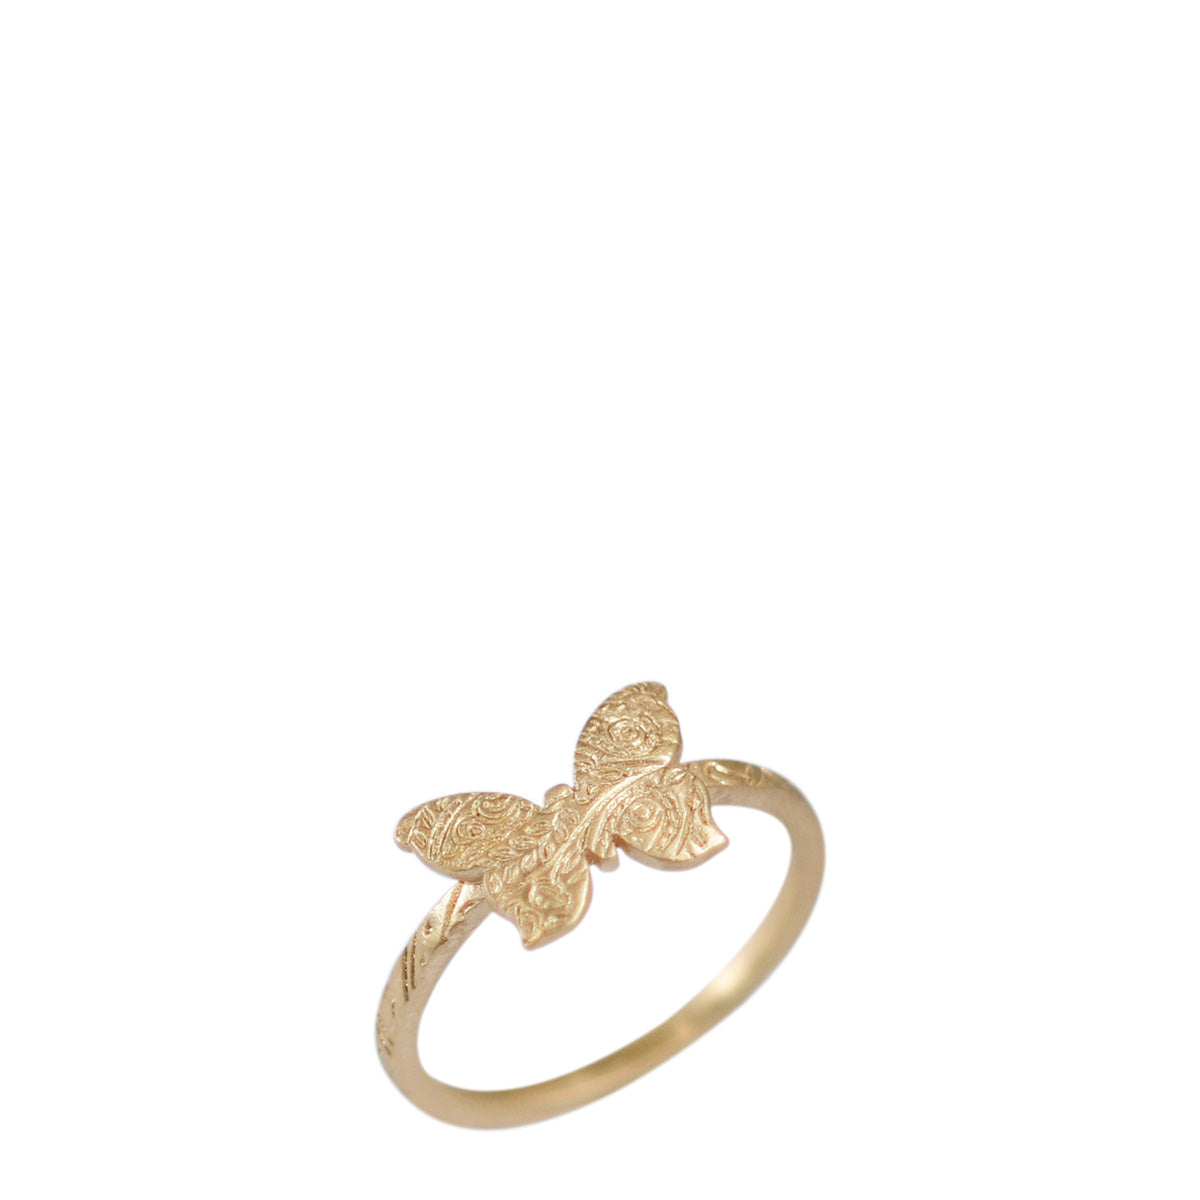 Silver Gold Sapphire Blue Butterfly Ring